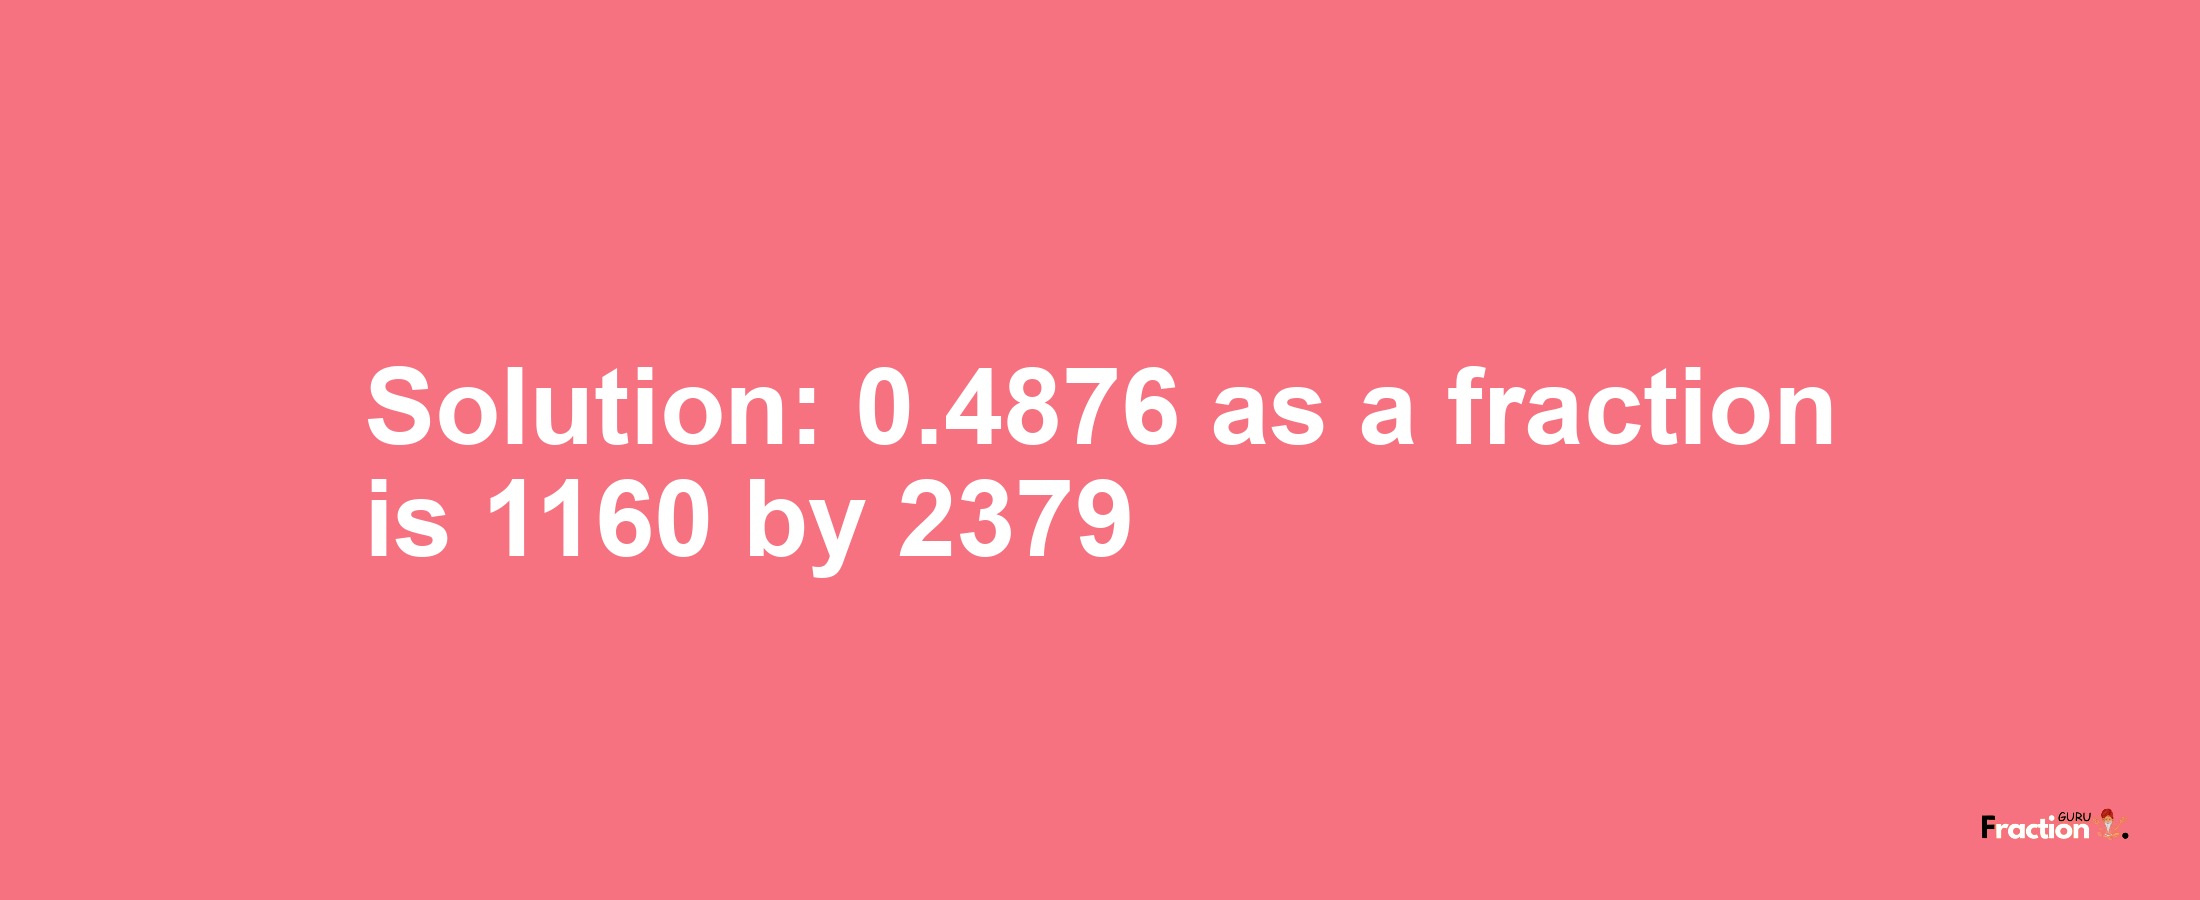 Solution:0.4876 as a fraction is 1160/2379